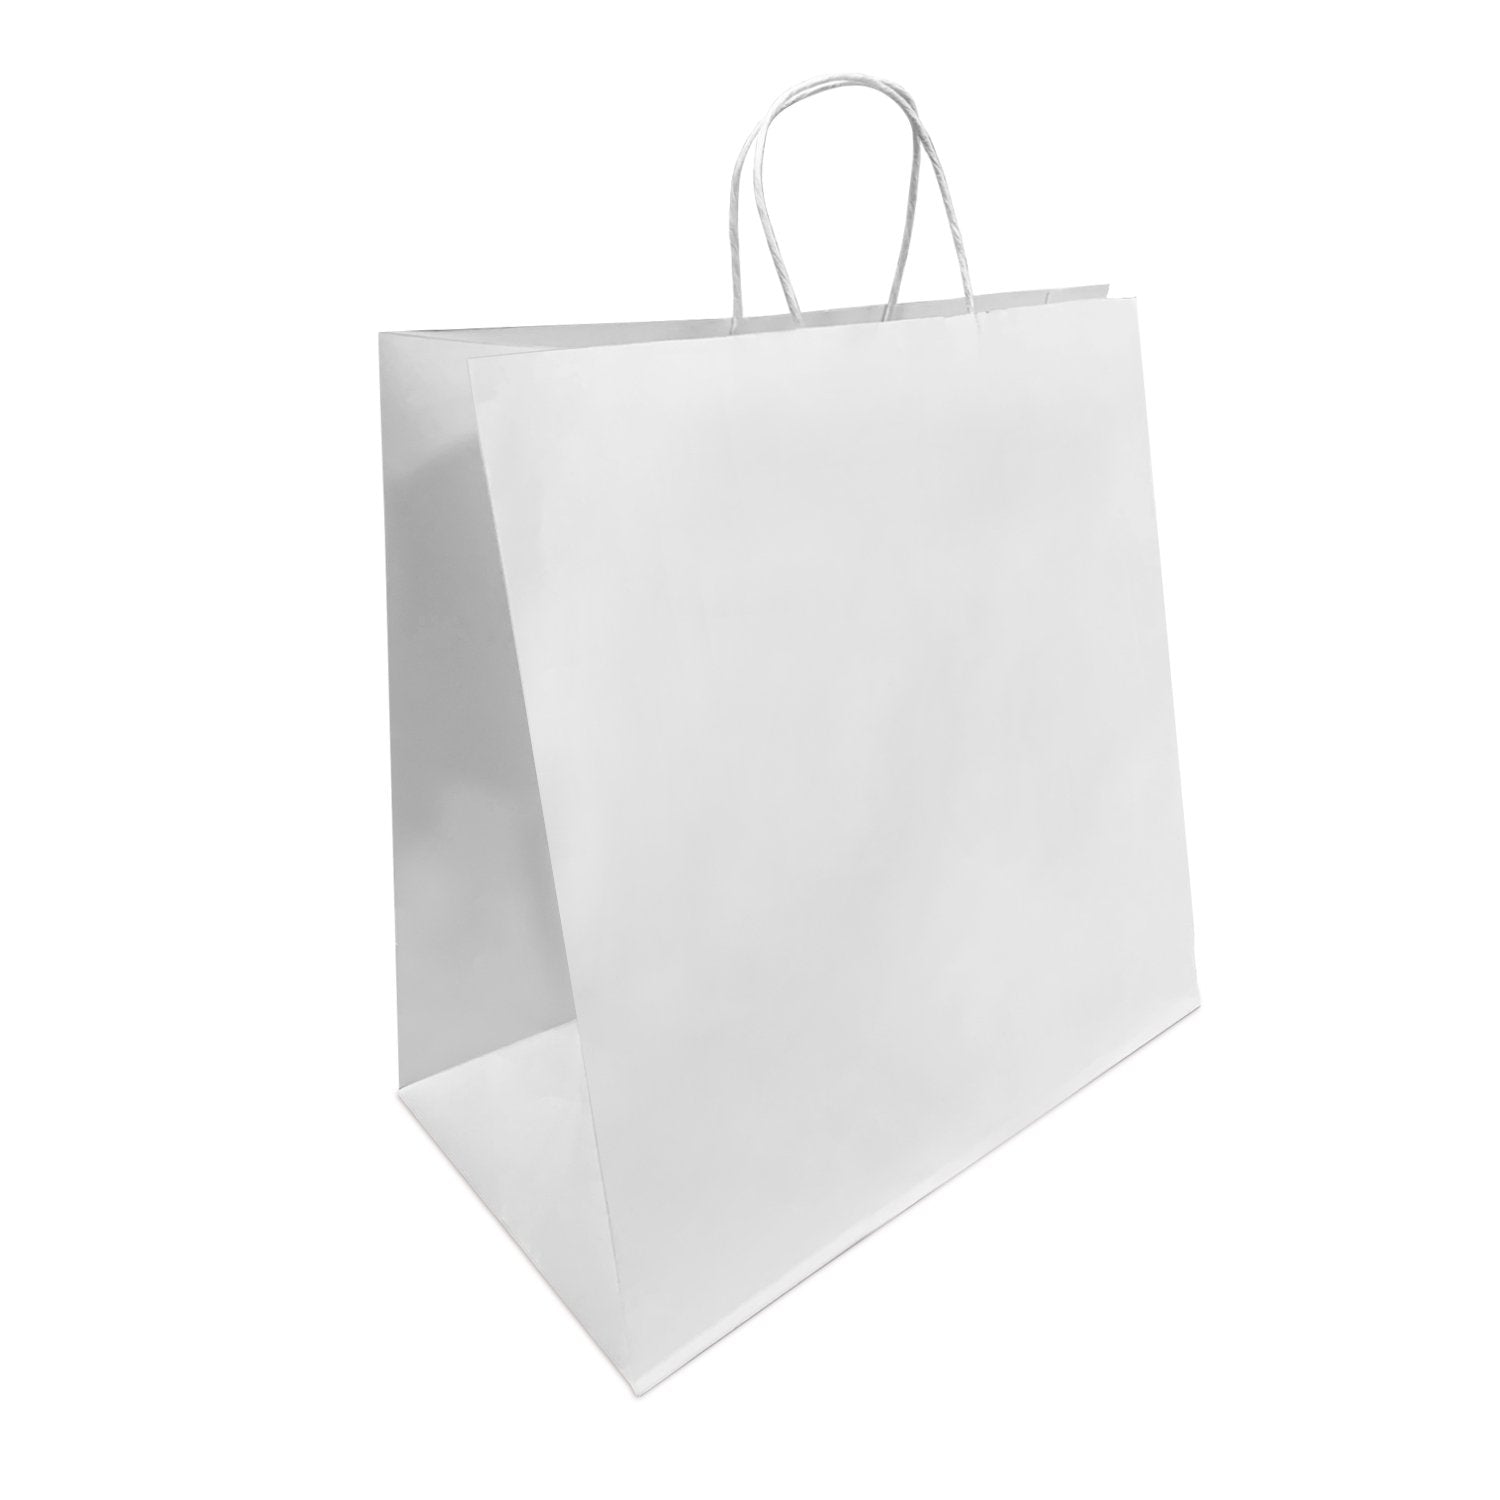 Handled White BB-1001 Cotton Fabric Printed Shopping Bag, 2.3 Kg,  Size/Dimension: 16x14.5 Inch